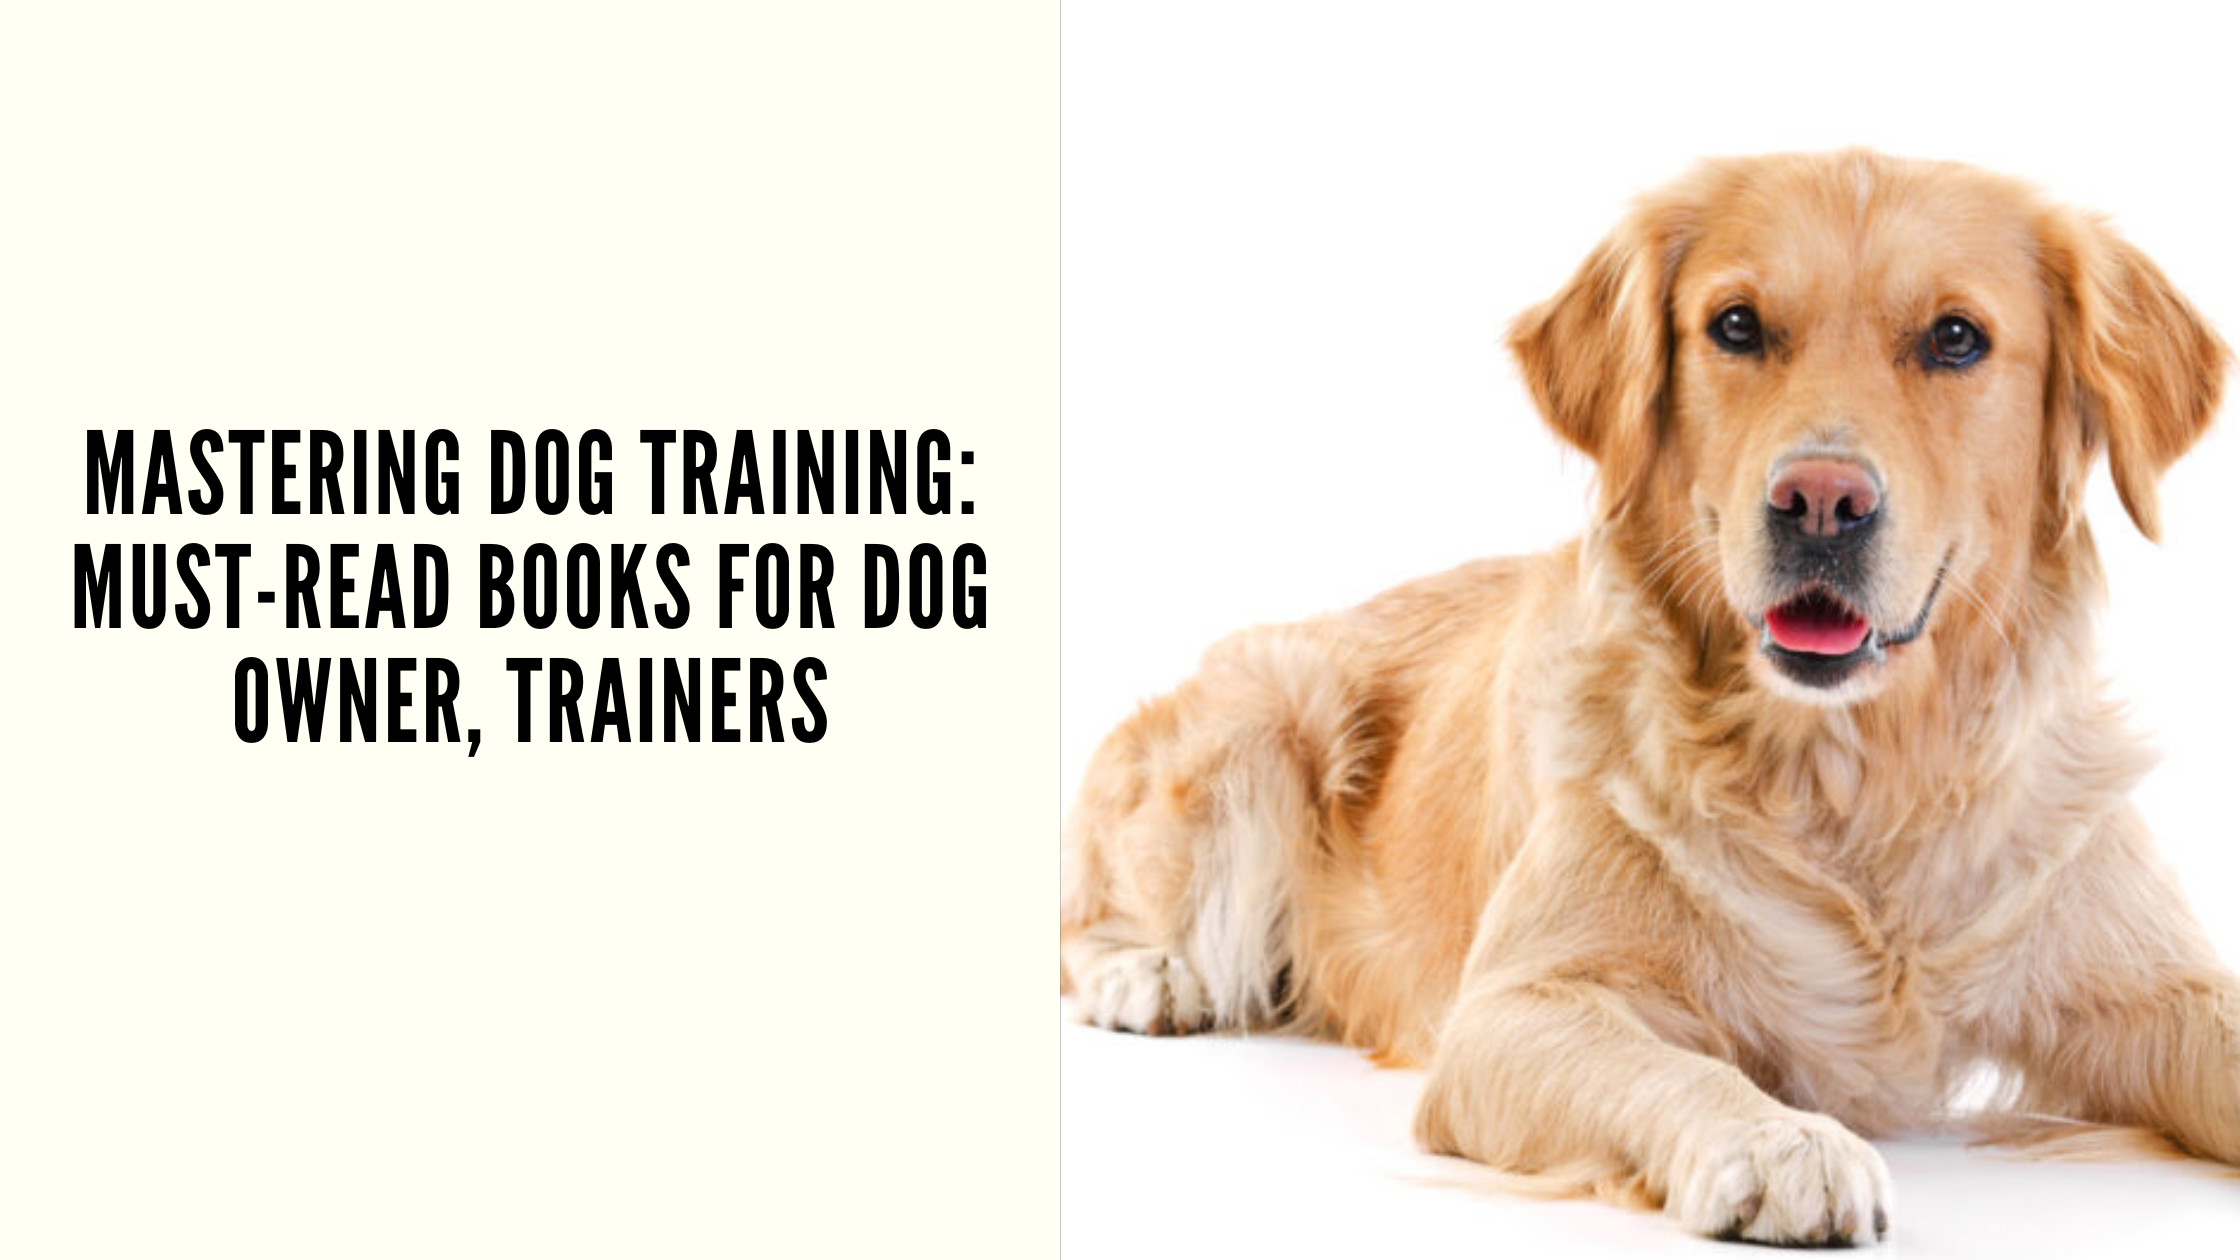 Mastering Dog Training: Must-Read Books for Dog Owner, Trainers